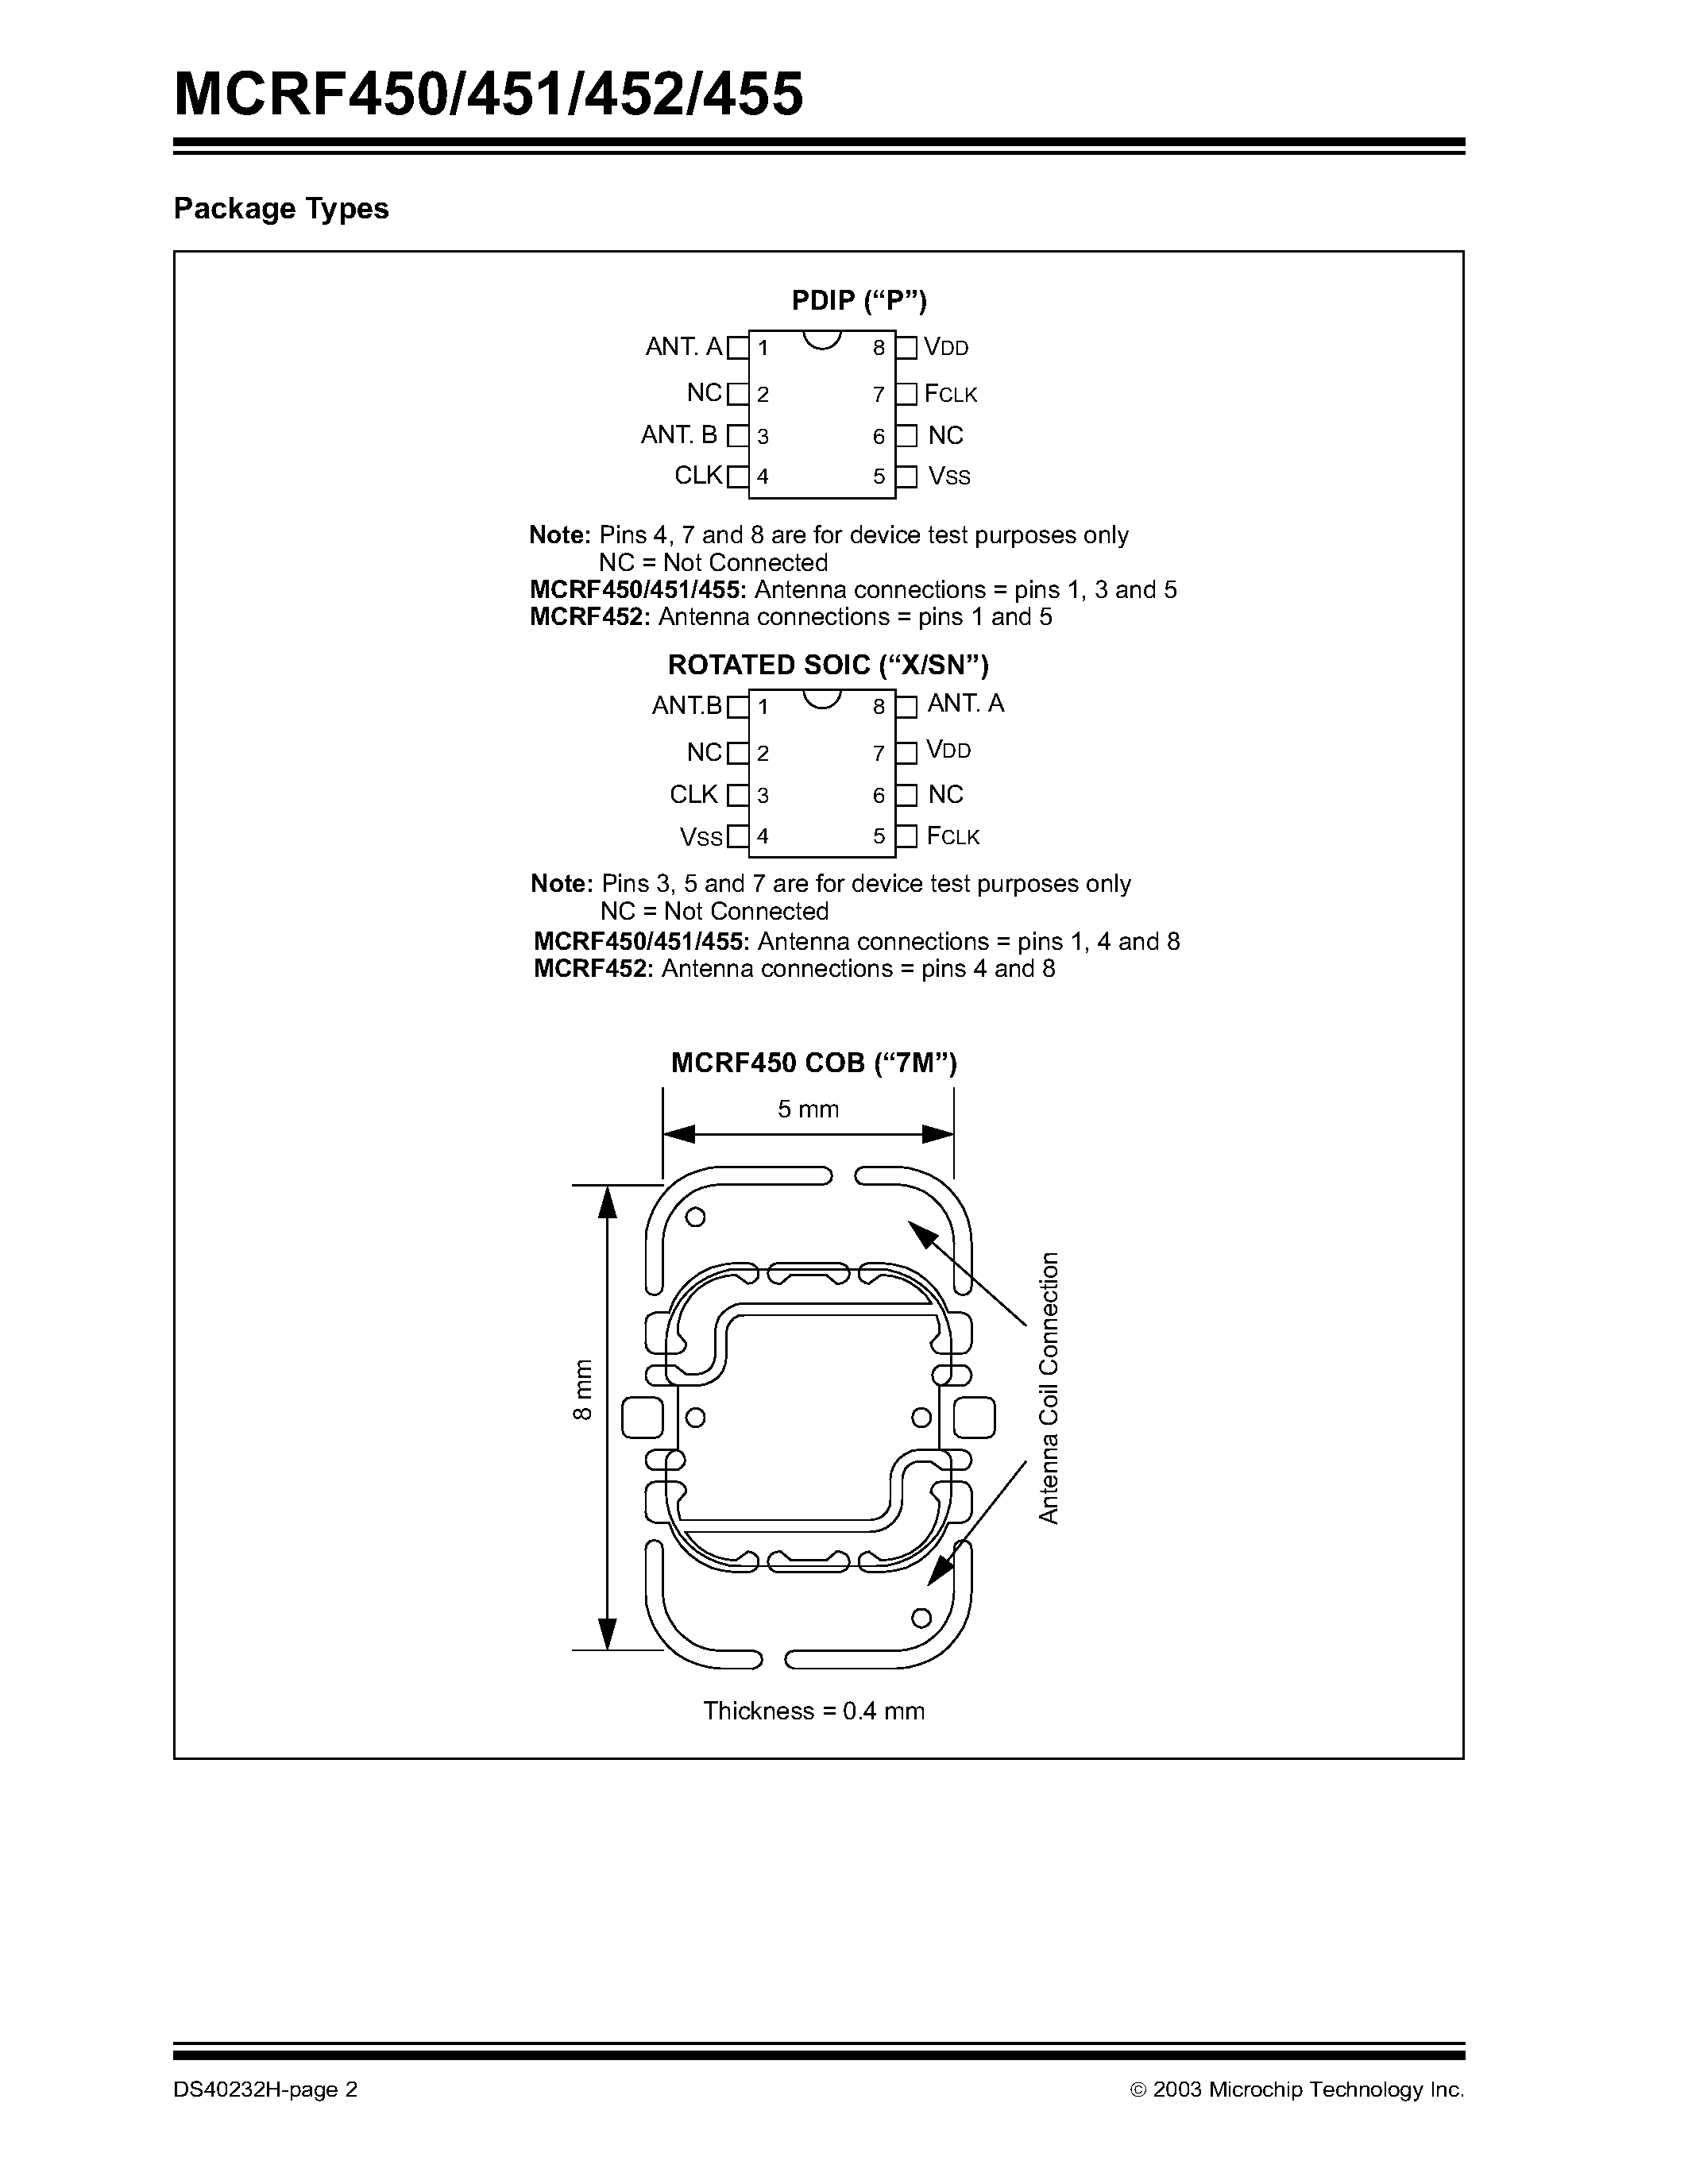 Datasheet MCRF451 - 13.56 MHz Read/Write Passive RFID Device page 2